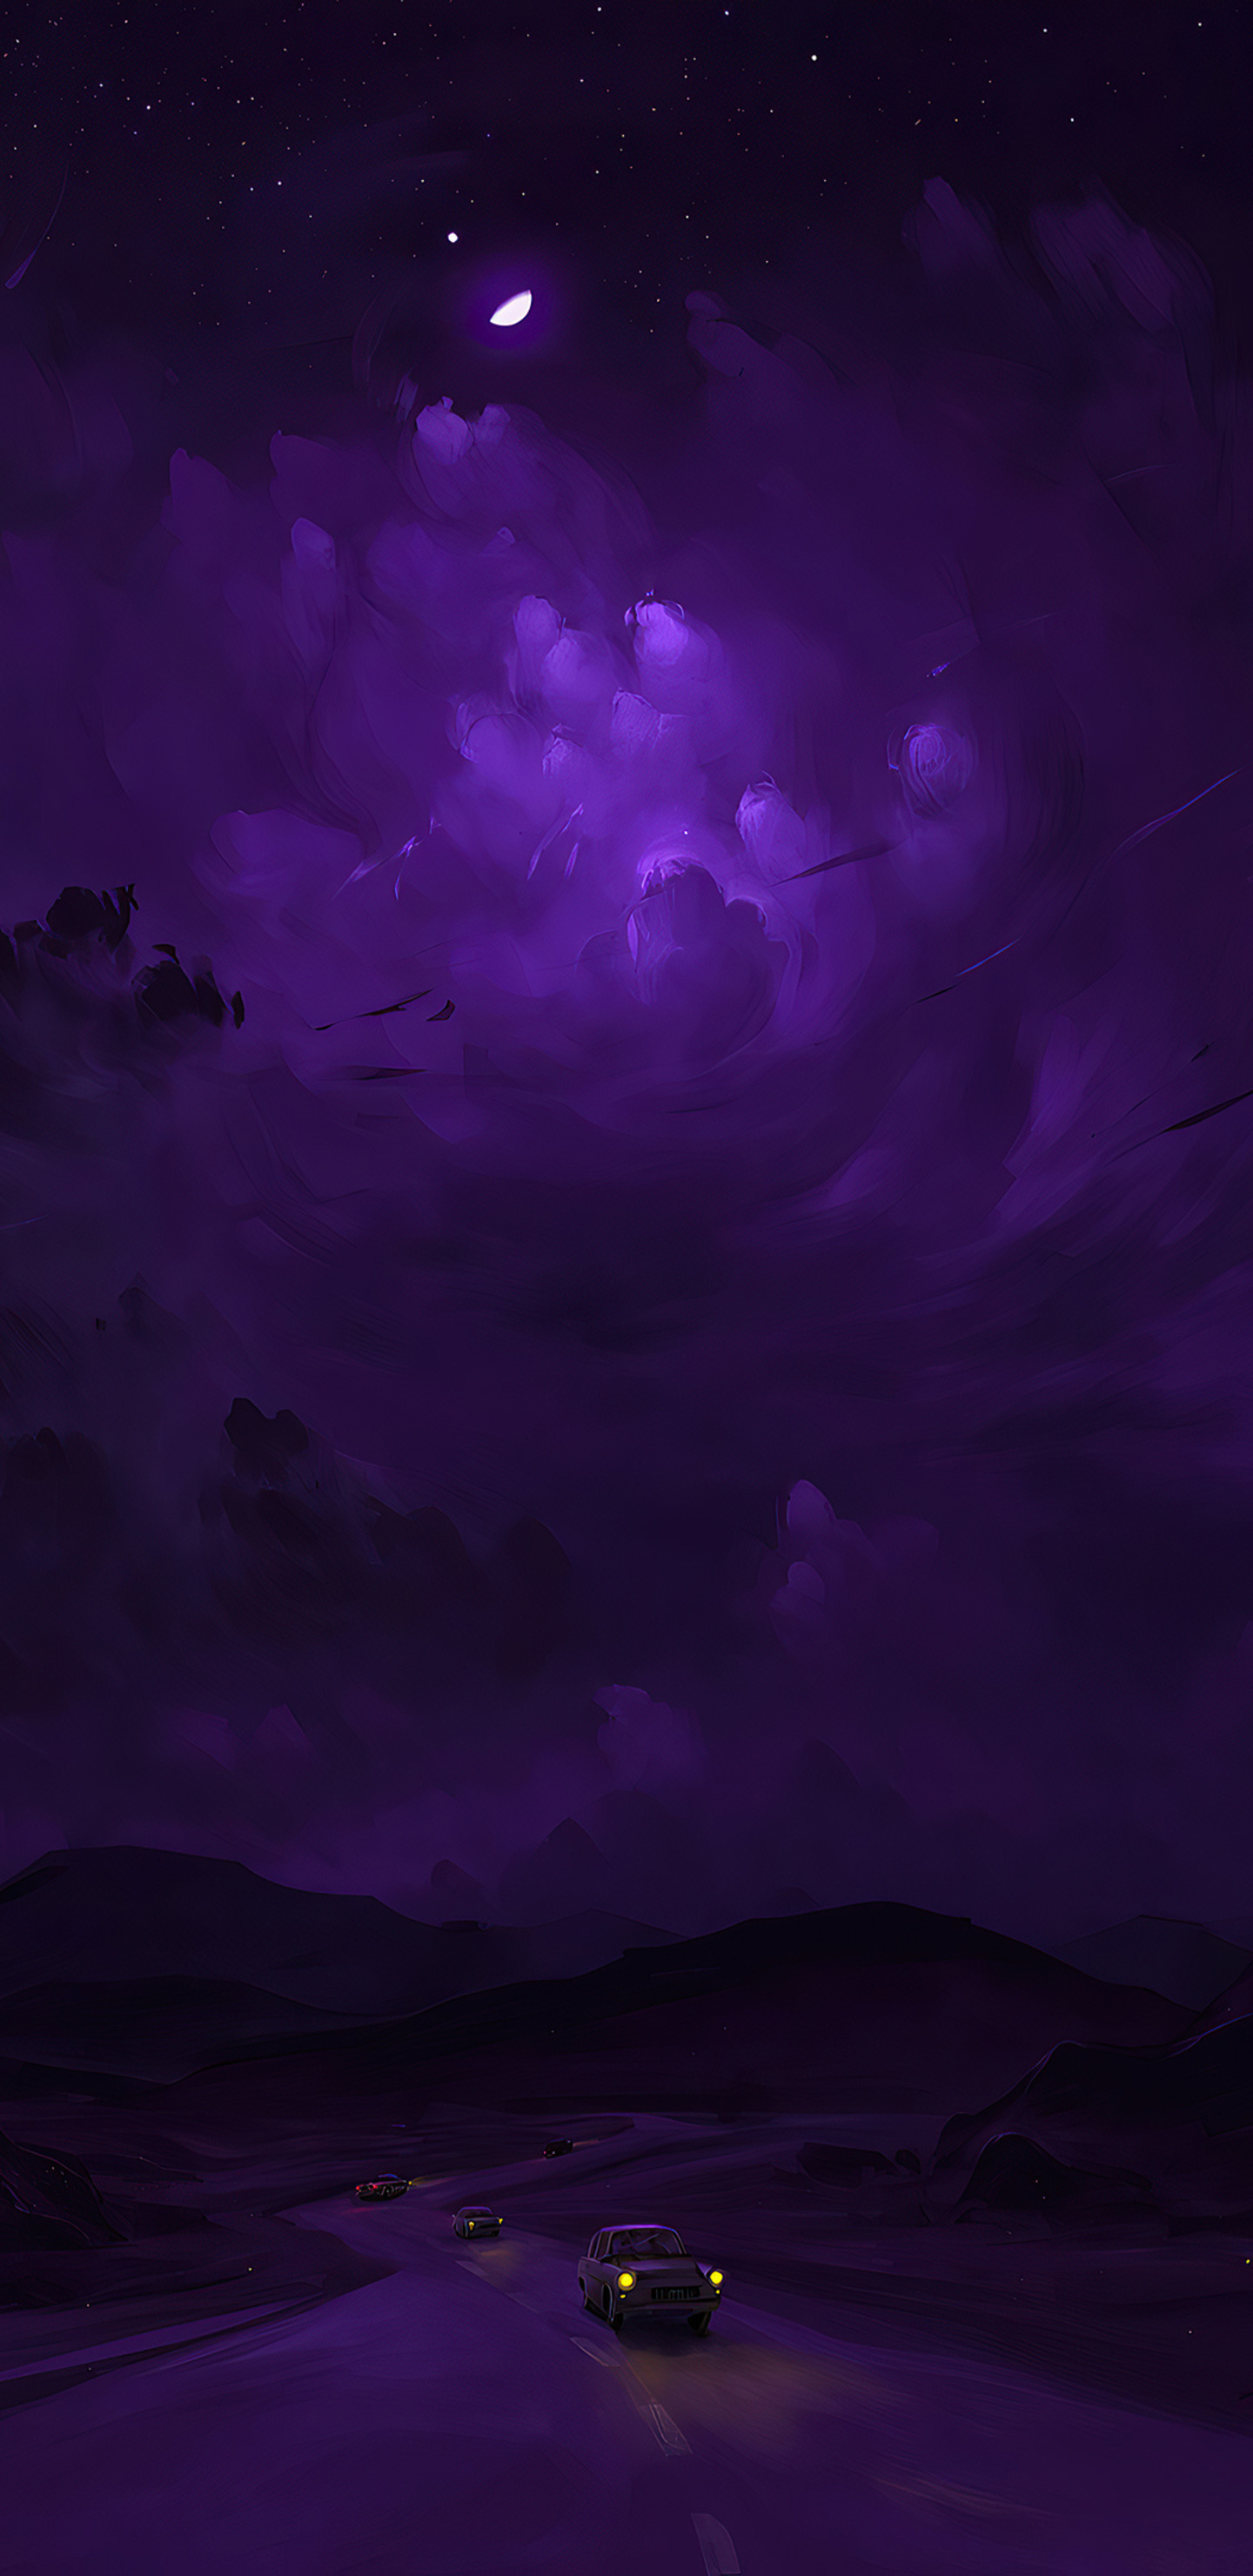 A purple sky with clouds and stars - Night